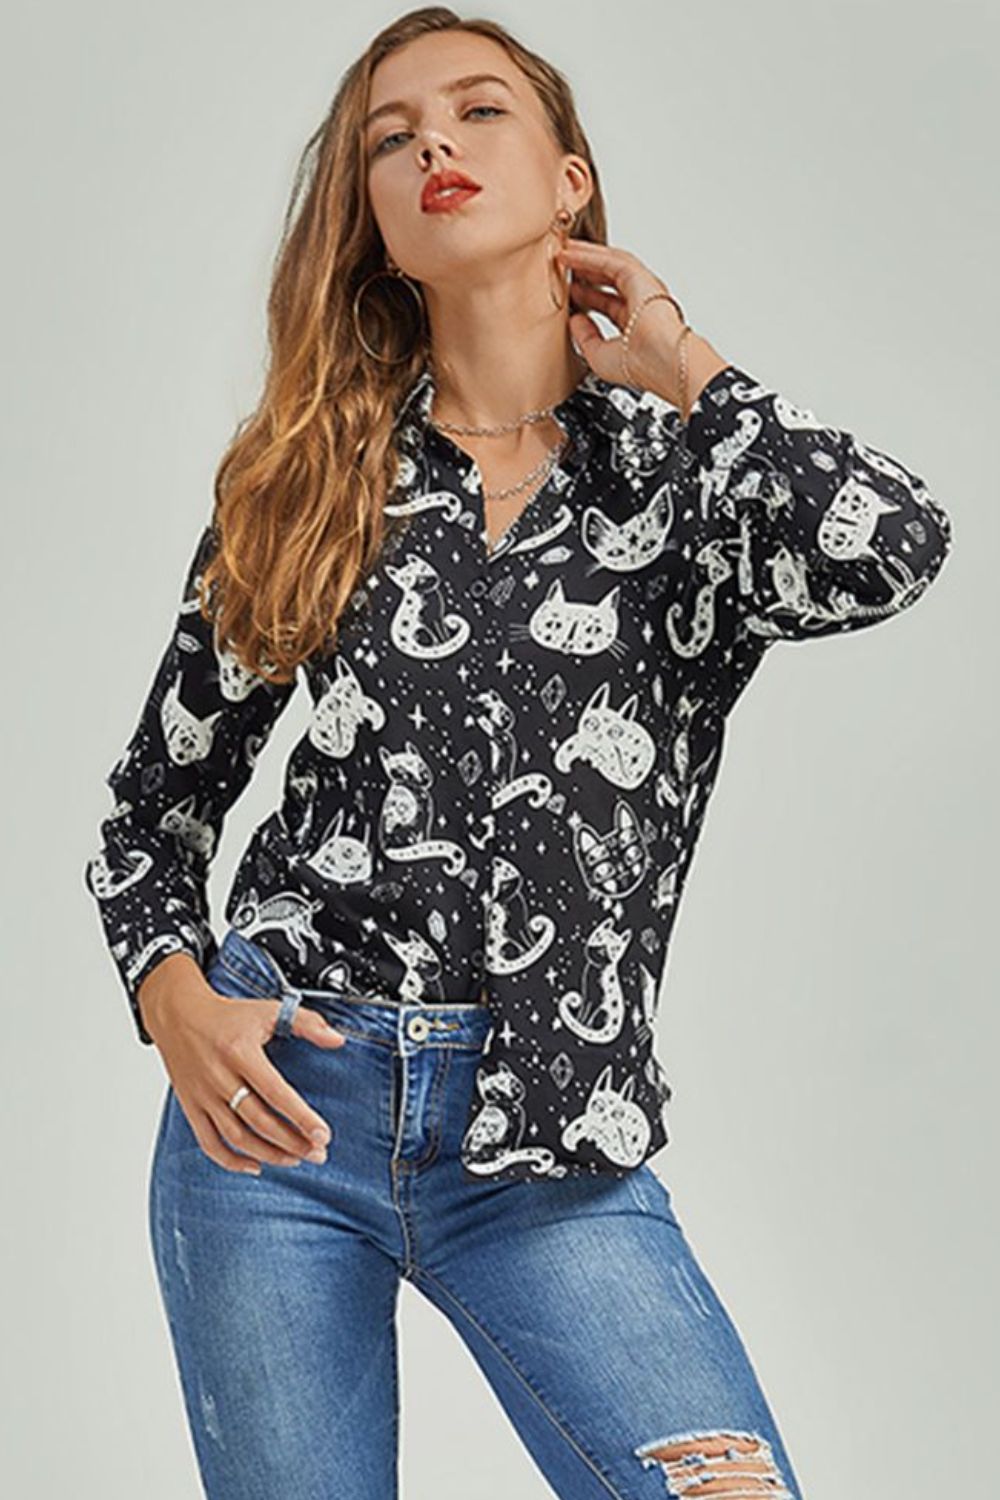 Cat Print Button-Up Shirt Print on any thing USA/STOD clothes